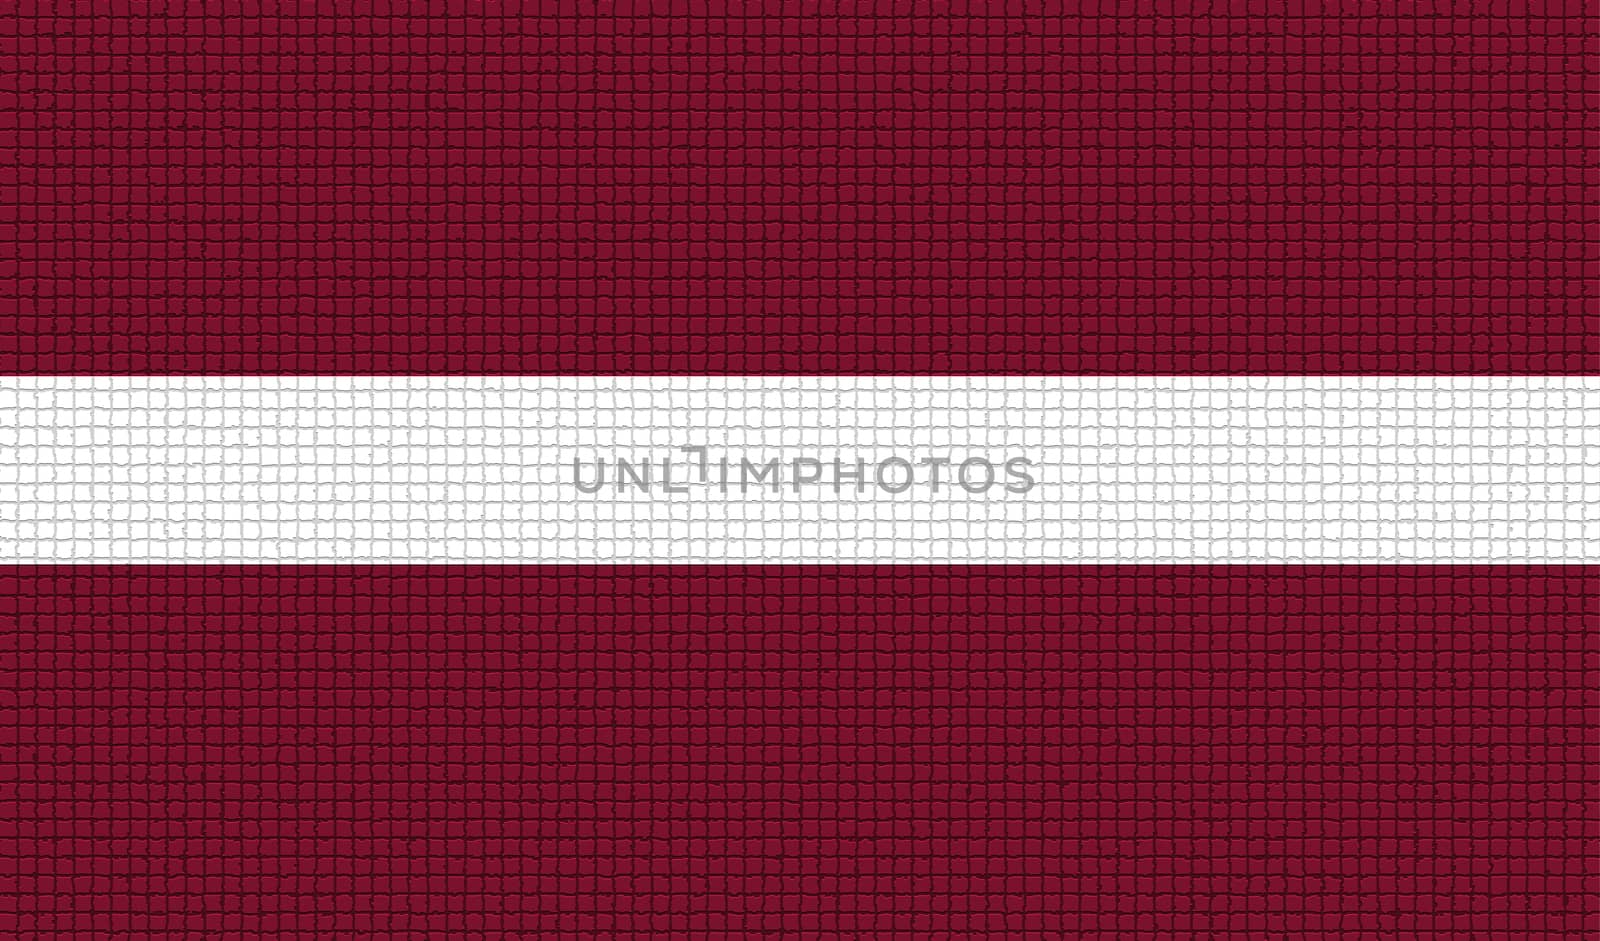 Flags of Latvia with abstract textures. Rasterized version